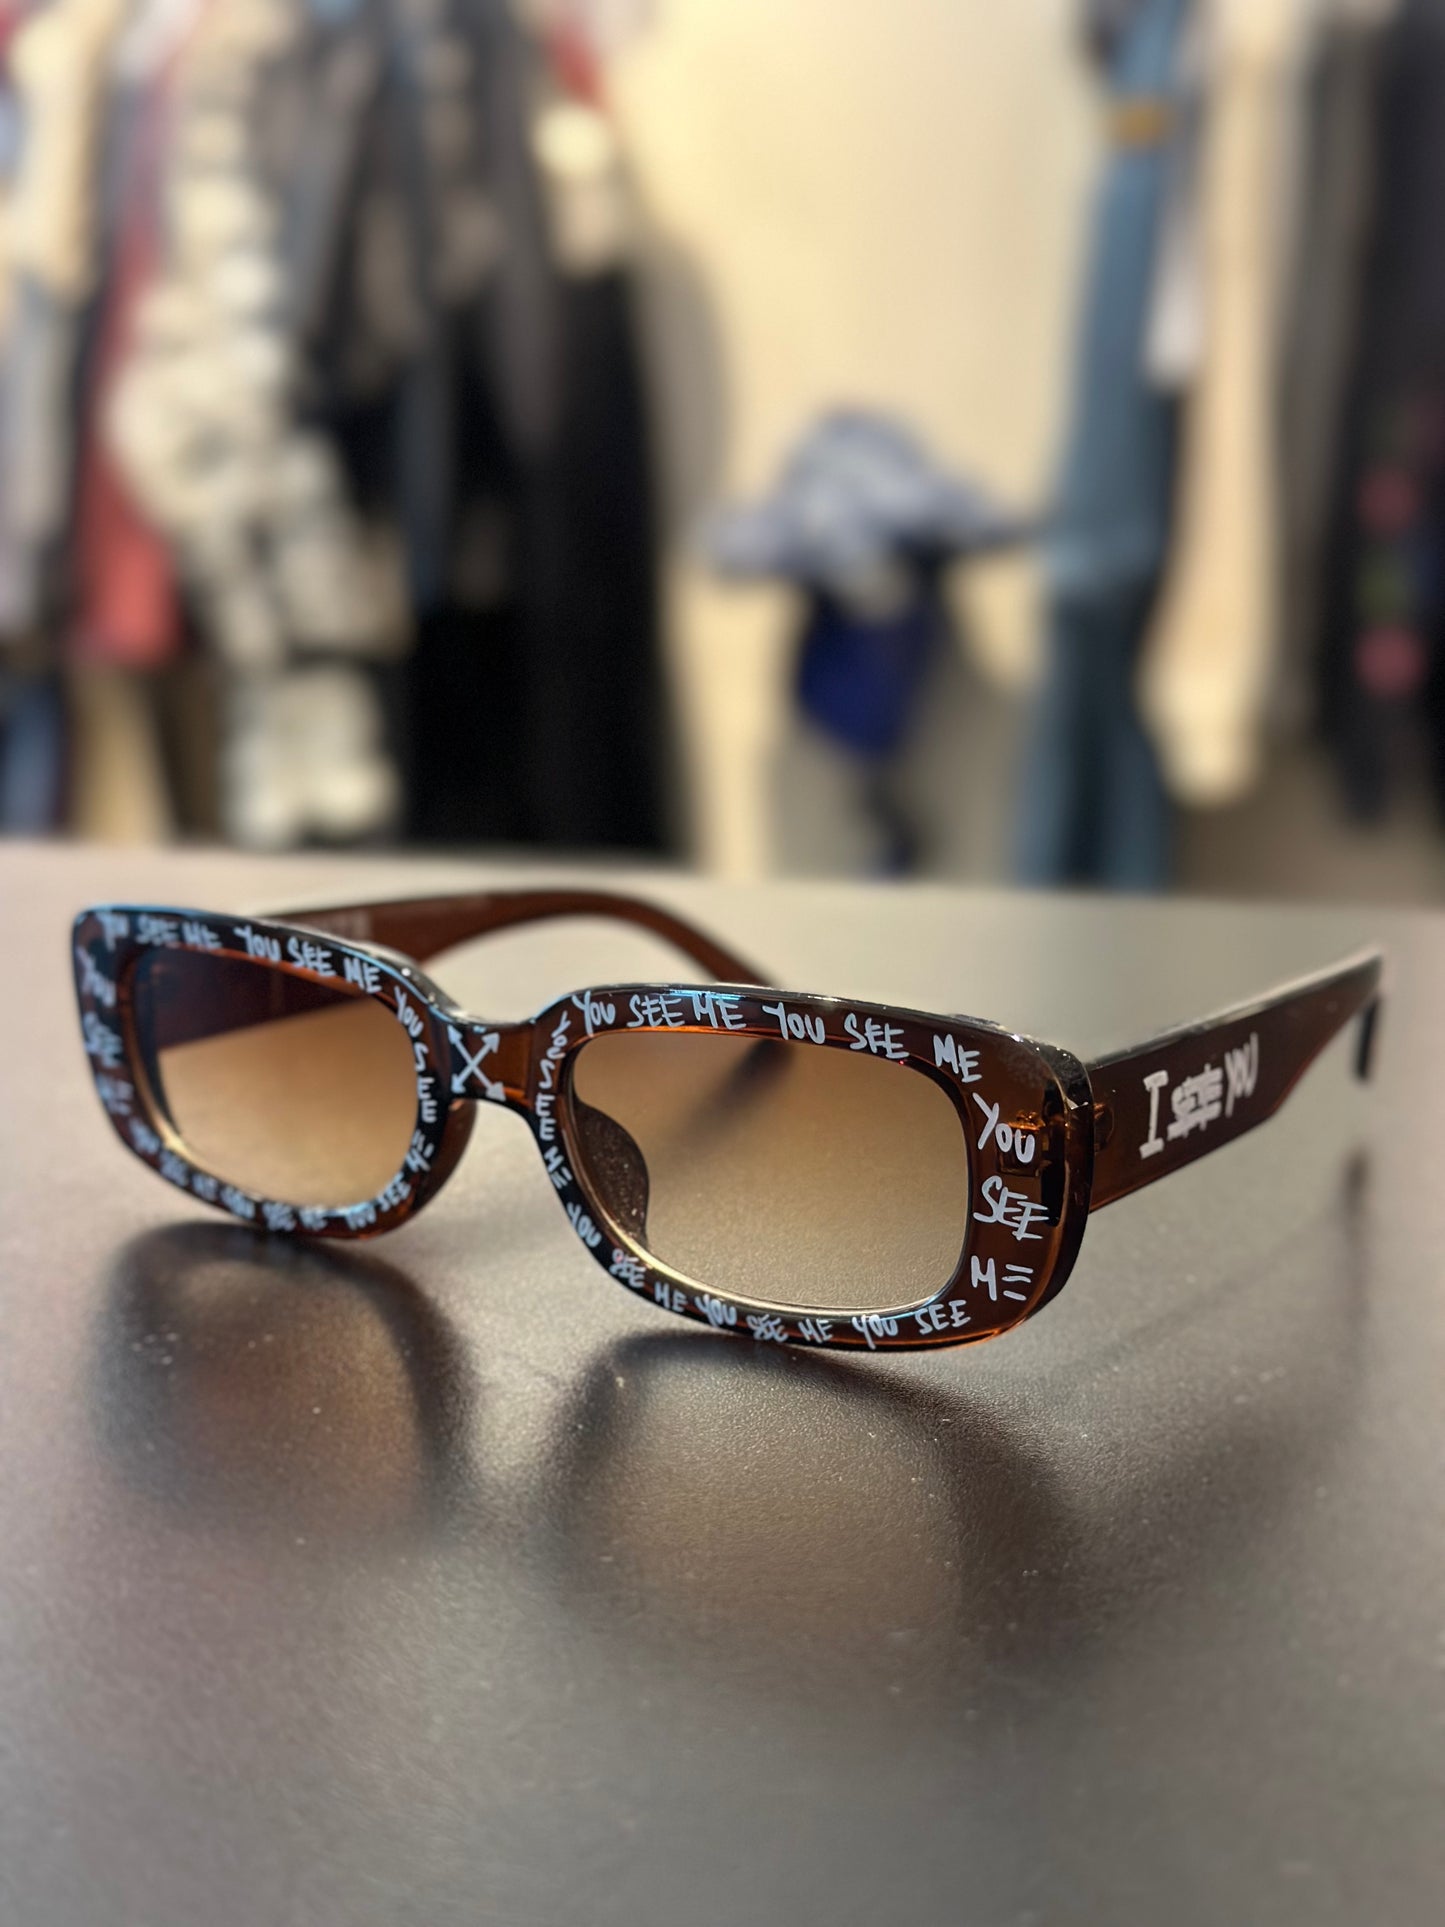  KNOTWTR: I SEE YOU/ RELAX SUNGLASSES (brown)